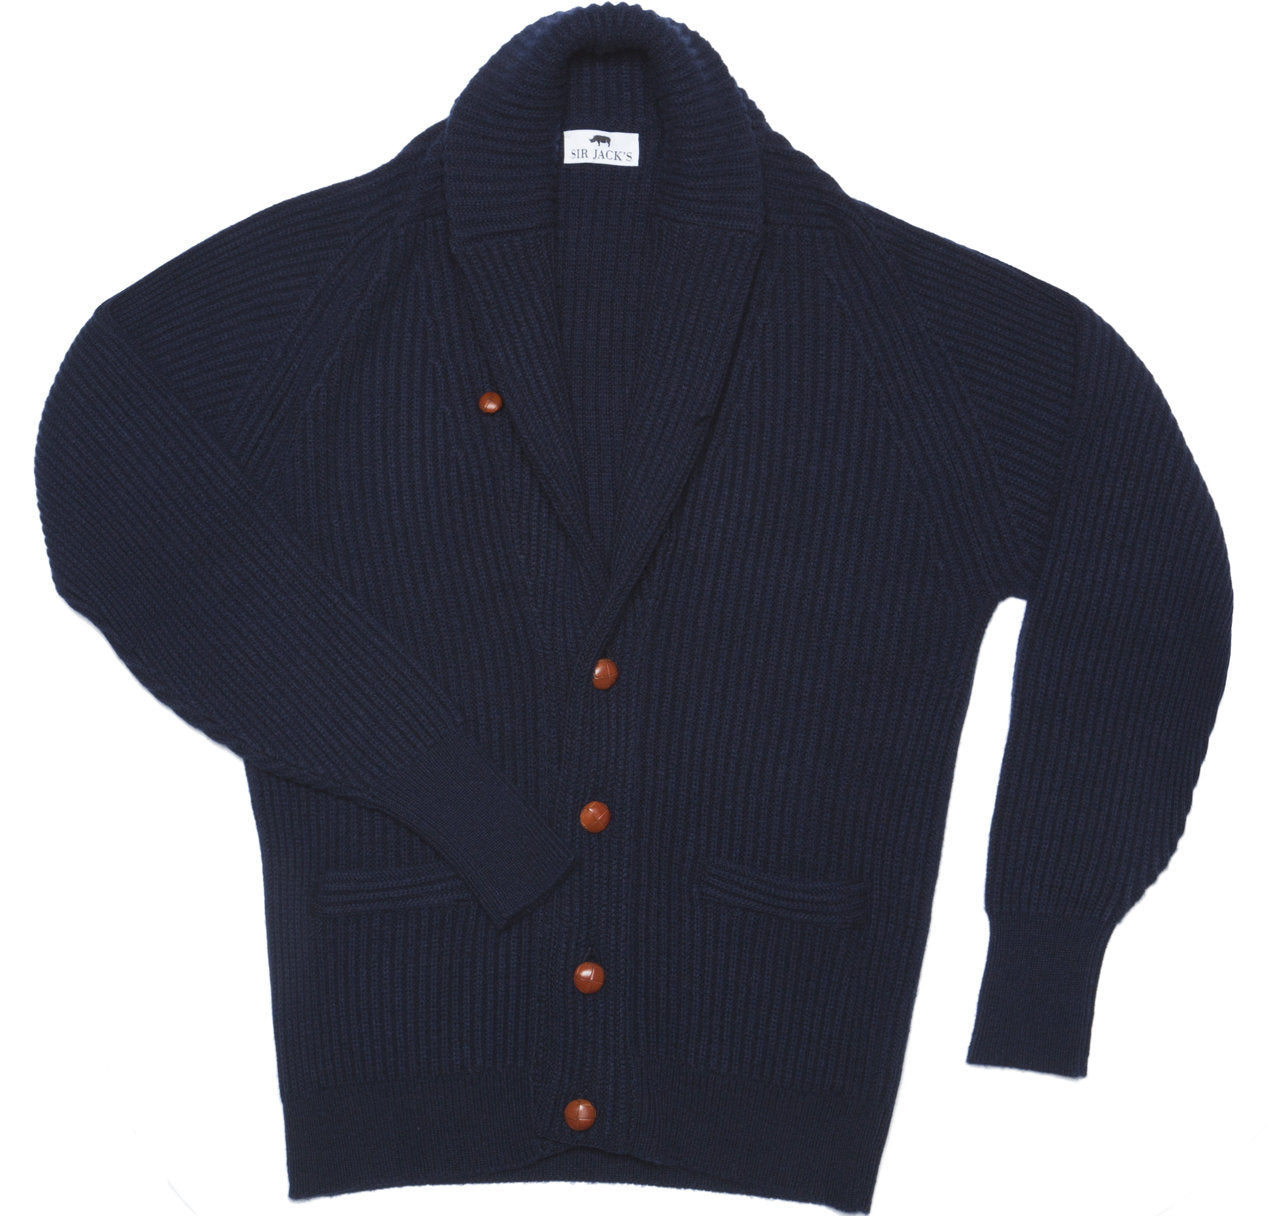 Sir Jack's Cashmere Shawl Cardigan Sweater in Navy